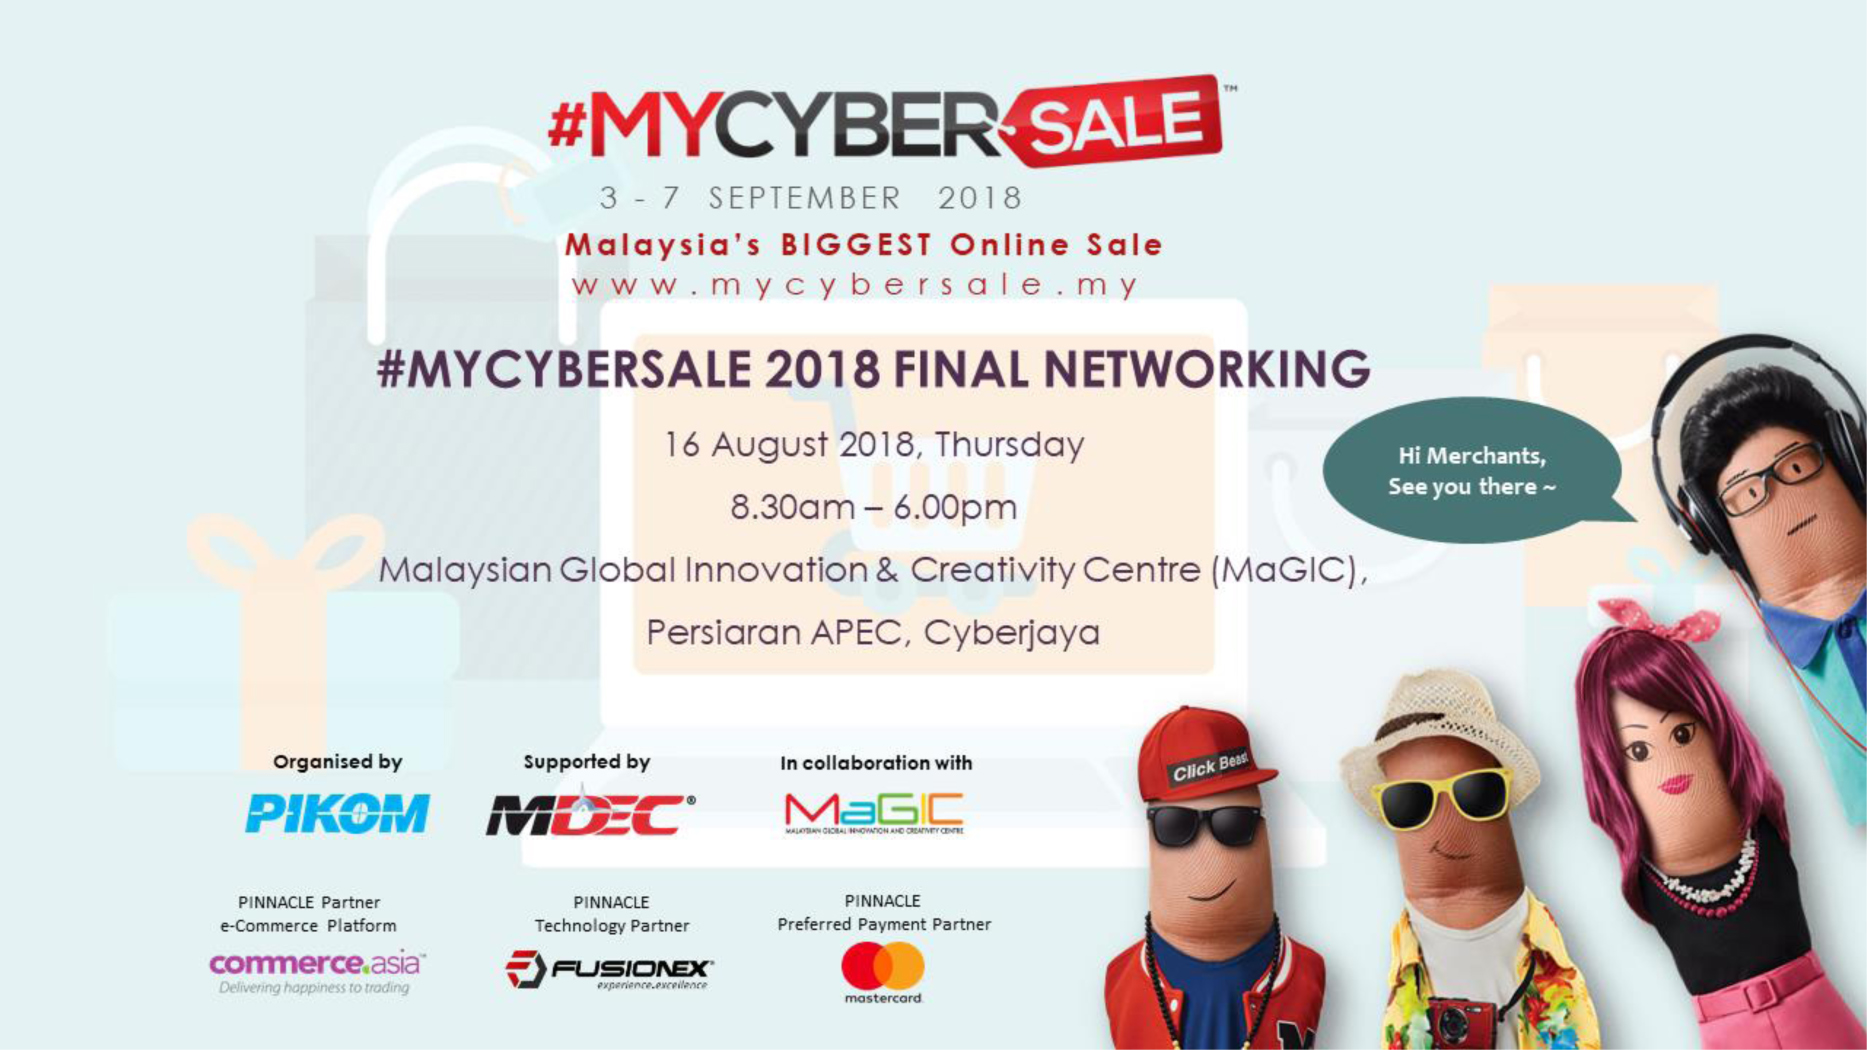 MYCYBERSALE 2018 Networking Event